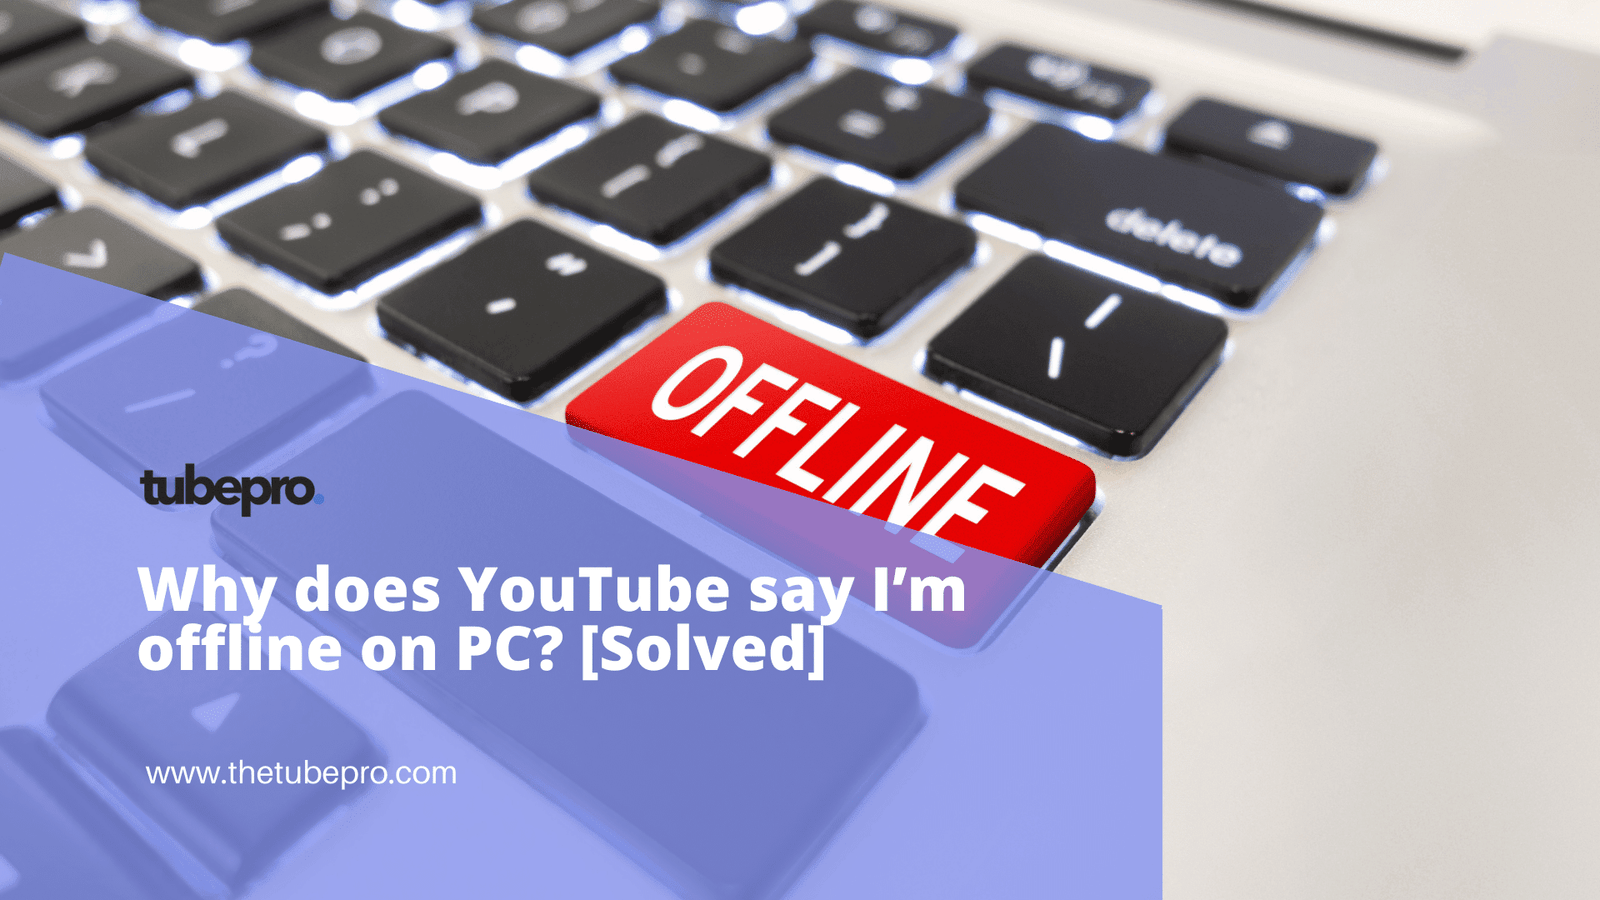 Why does YouTube say I’m offline on PC? [Solved]